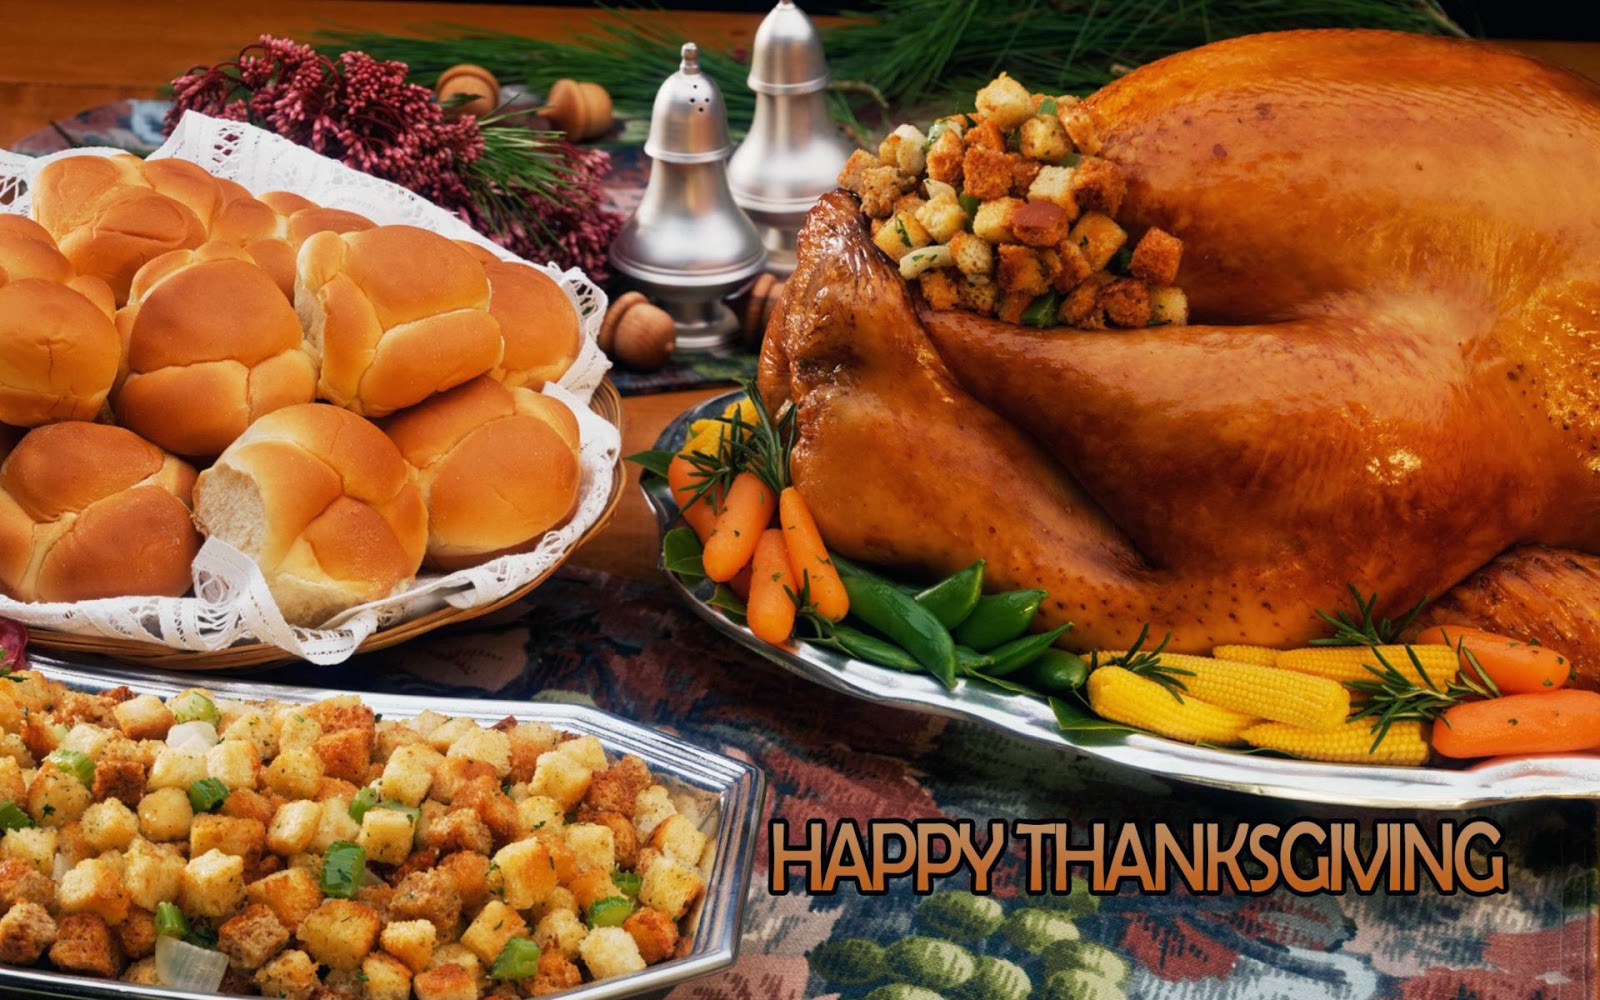 All New Wallpaper Thanksgiving 2013 Wallpapers